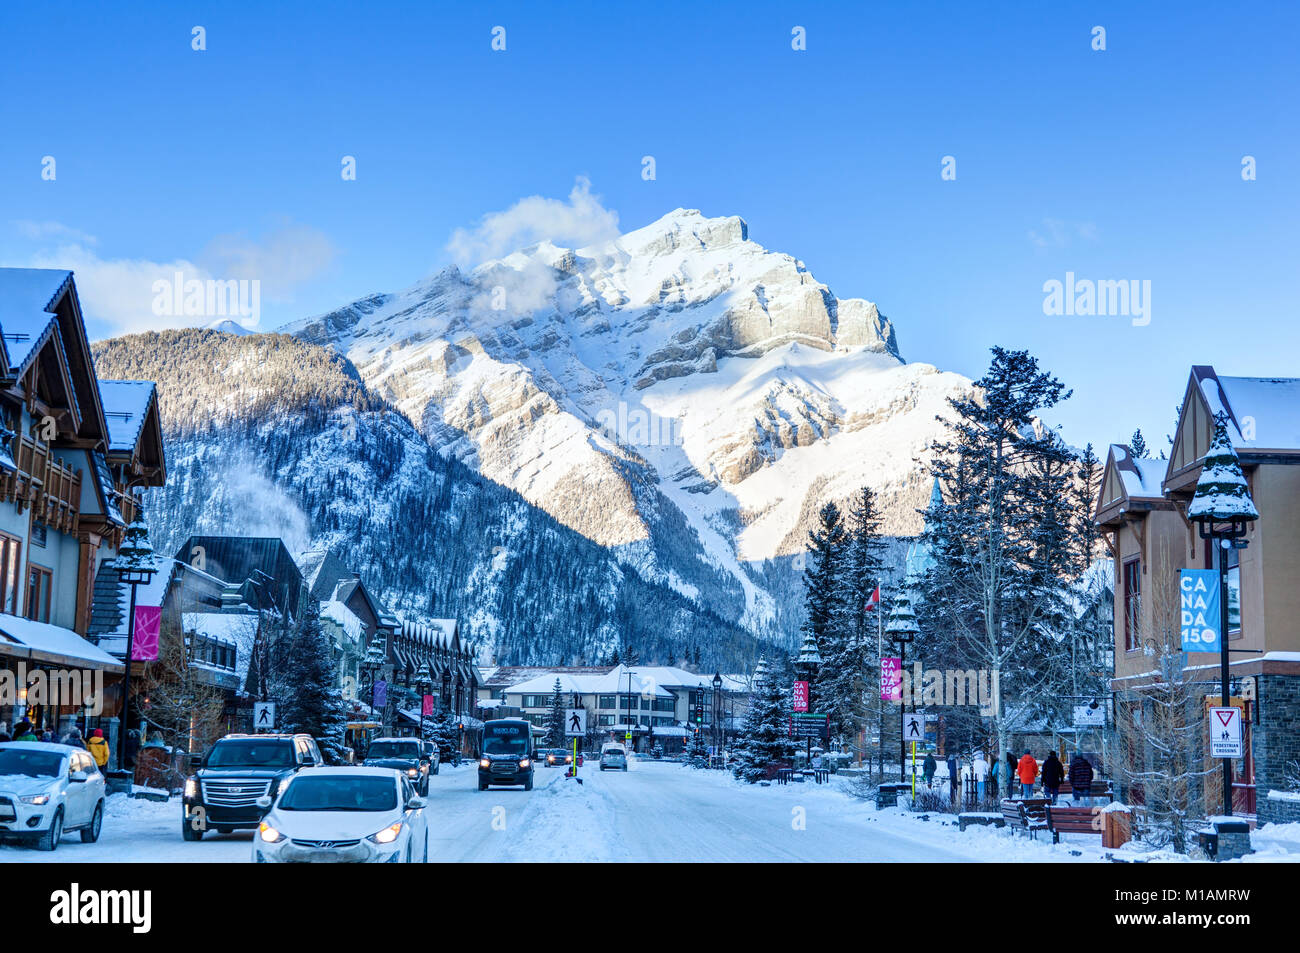 BANFF, CANADA - DEC 22, 2017: Winter scene on Banff Avenue in the Banff National Park with Cascade Mountain in the background. The townsite is a major Stock Photo